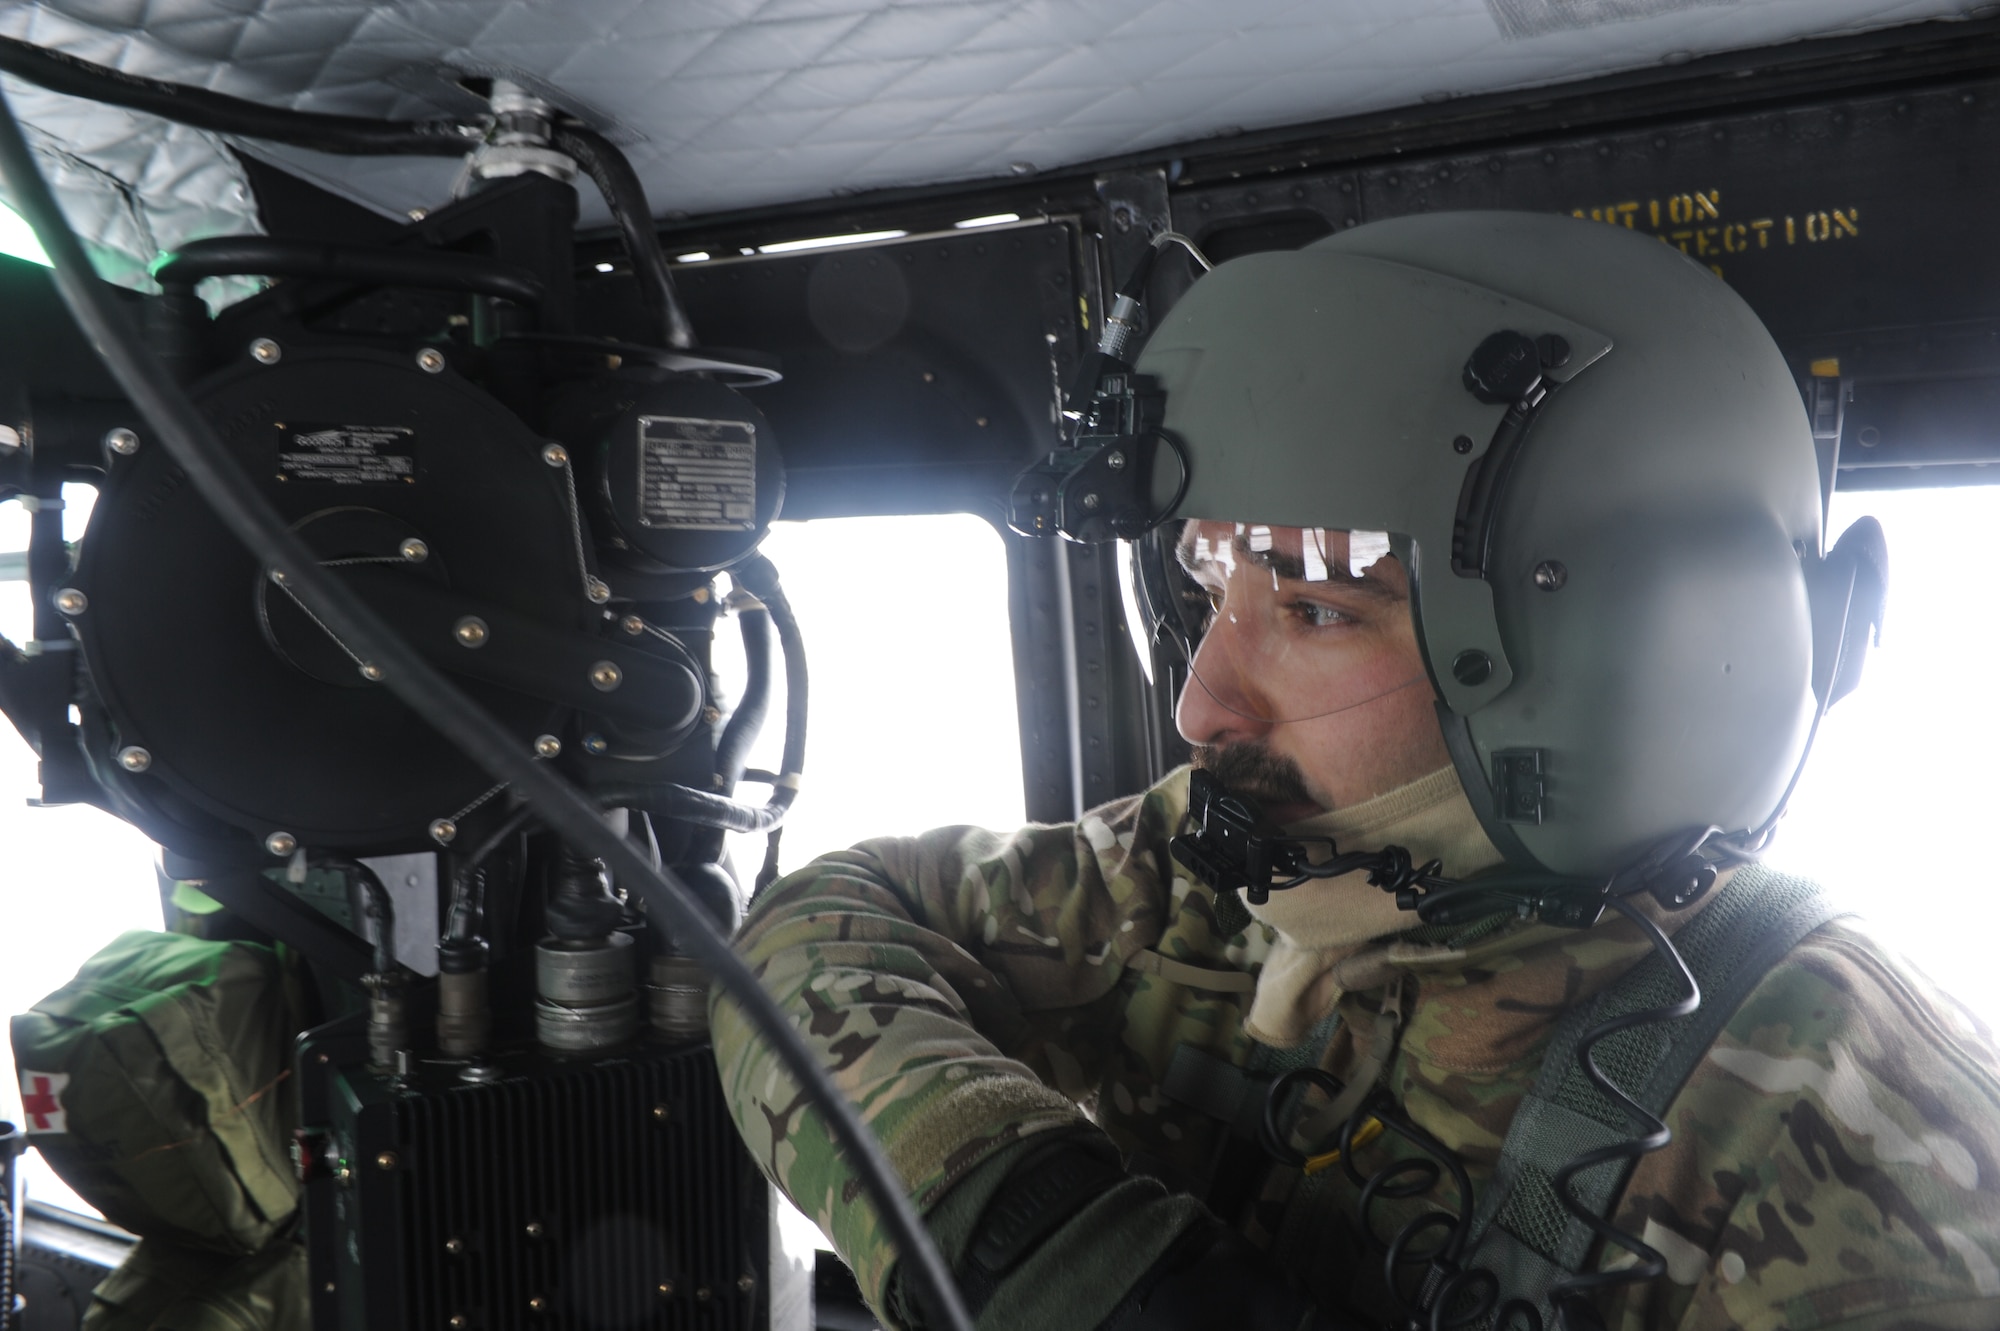 Tech. Sgt. Thomas Liscomb, 54th Helicopter Squadron flight engineer, checks his gear in a UH1-N helicopter near Minot Air Force Base, N.D., Feb. 11, 2015. Liscomb and a team of five other individuals dispatched to an area surrounding the base and practiced search and rescue operations. (U.S. Air Force photos/Senior Airman Stephanie Morris)